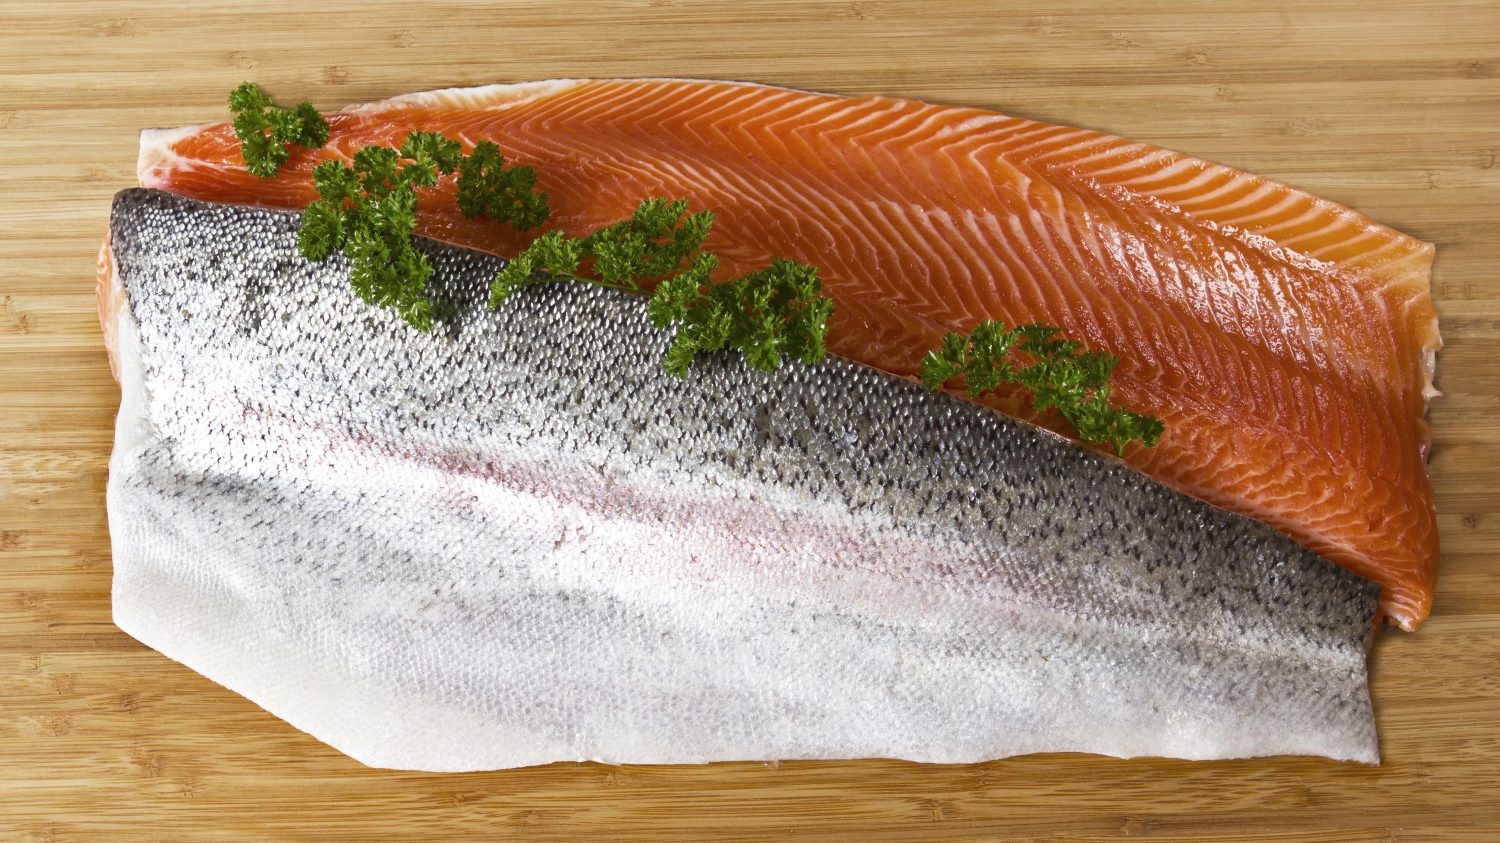 Image for One-Pan Fresh Trout and Asparagus